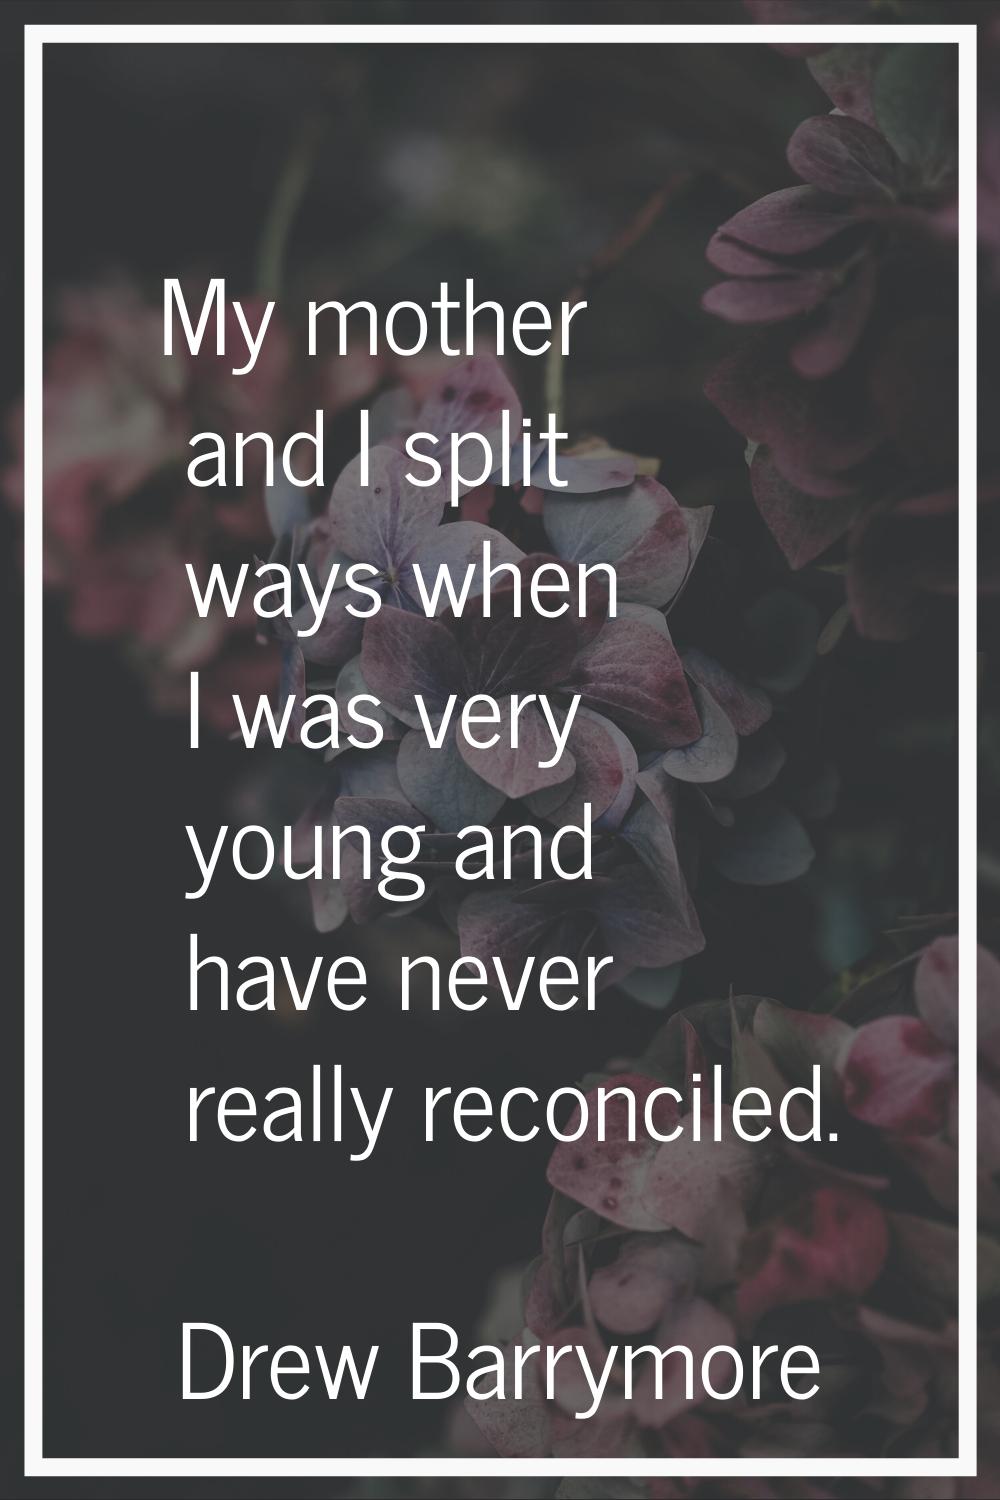 My mother and I split ways when I was very young and have never really reconciled.